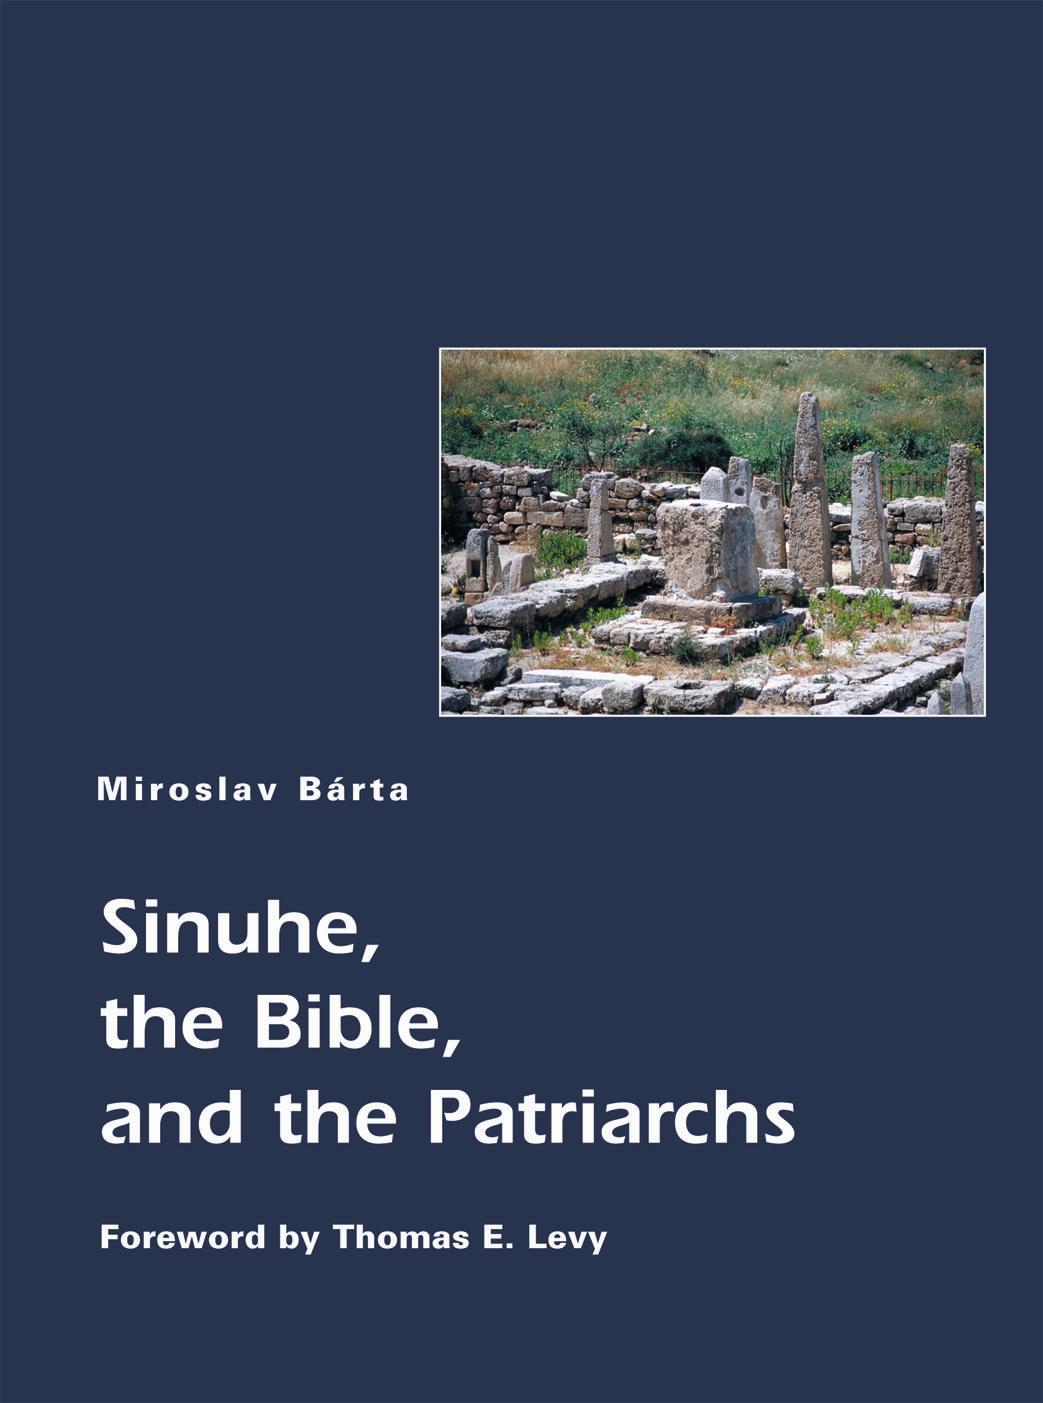 Sinuhe, the Bible and the Patriarchs